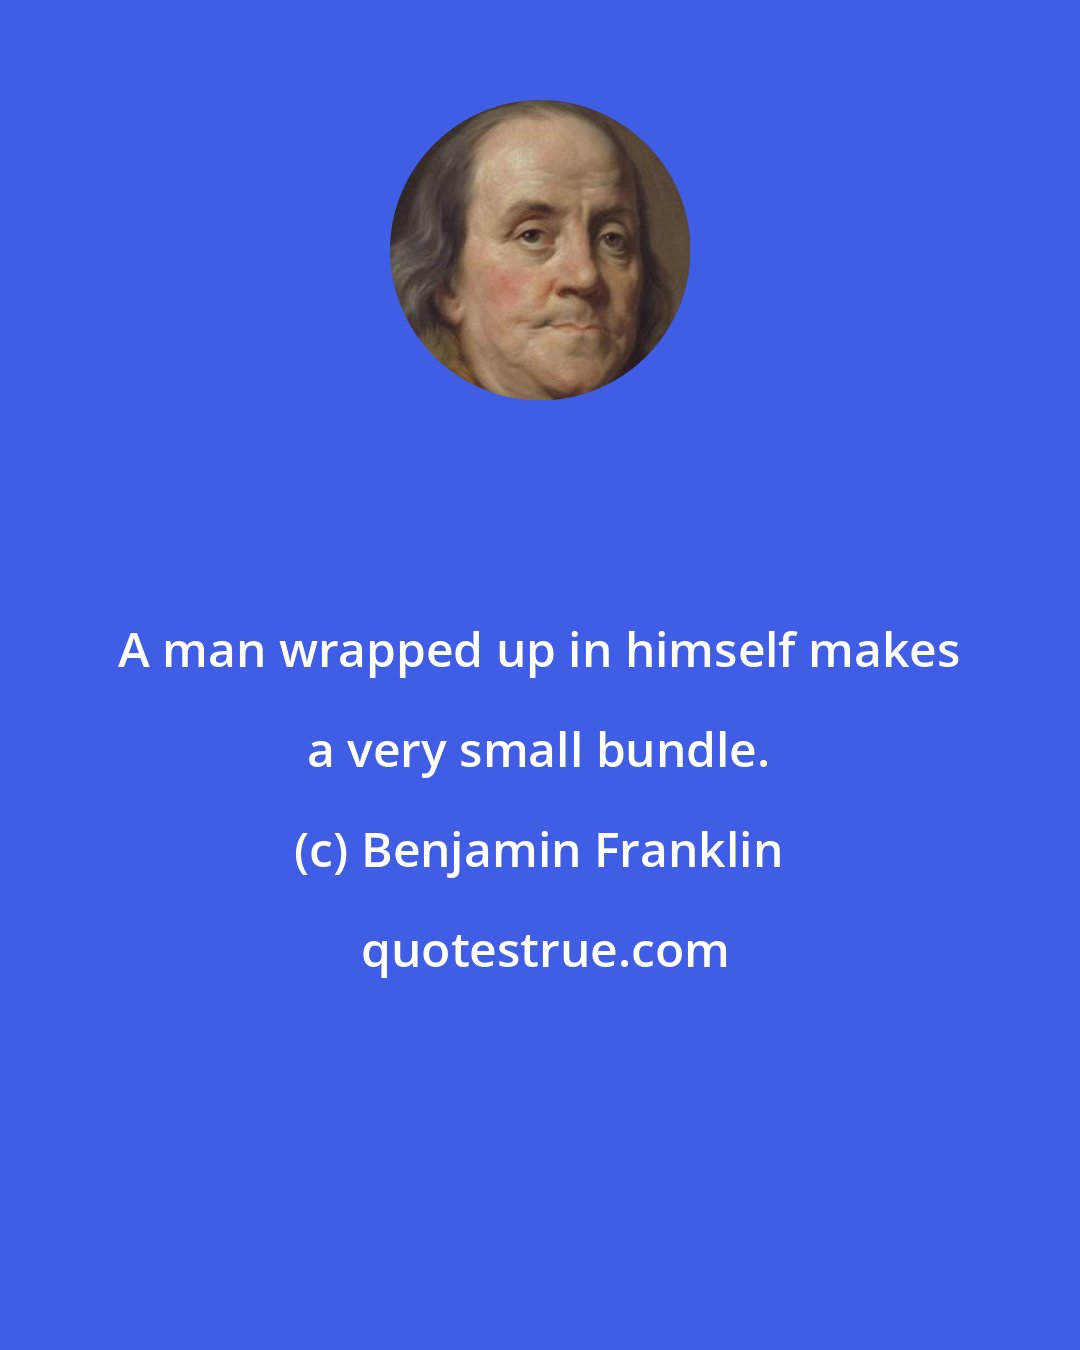 Benjamin Franklin: A man wrapped up in himself makes a very small bundle.